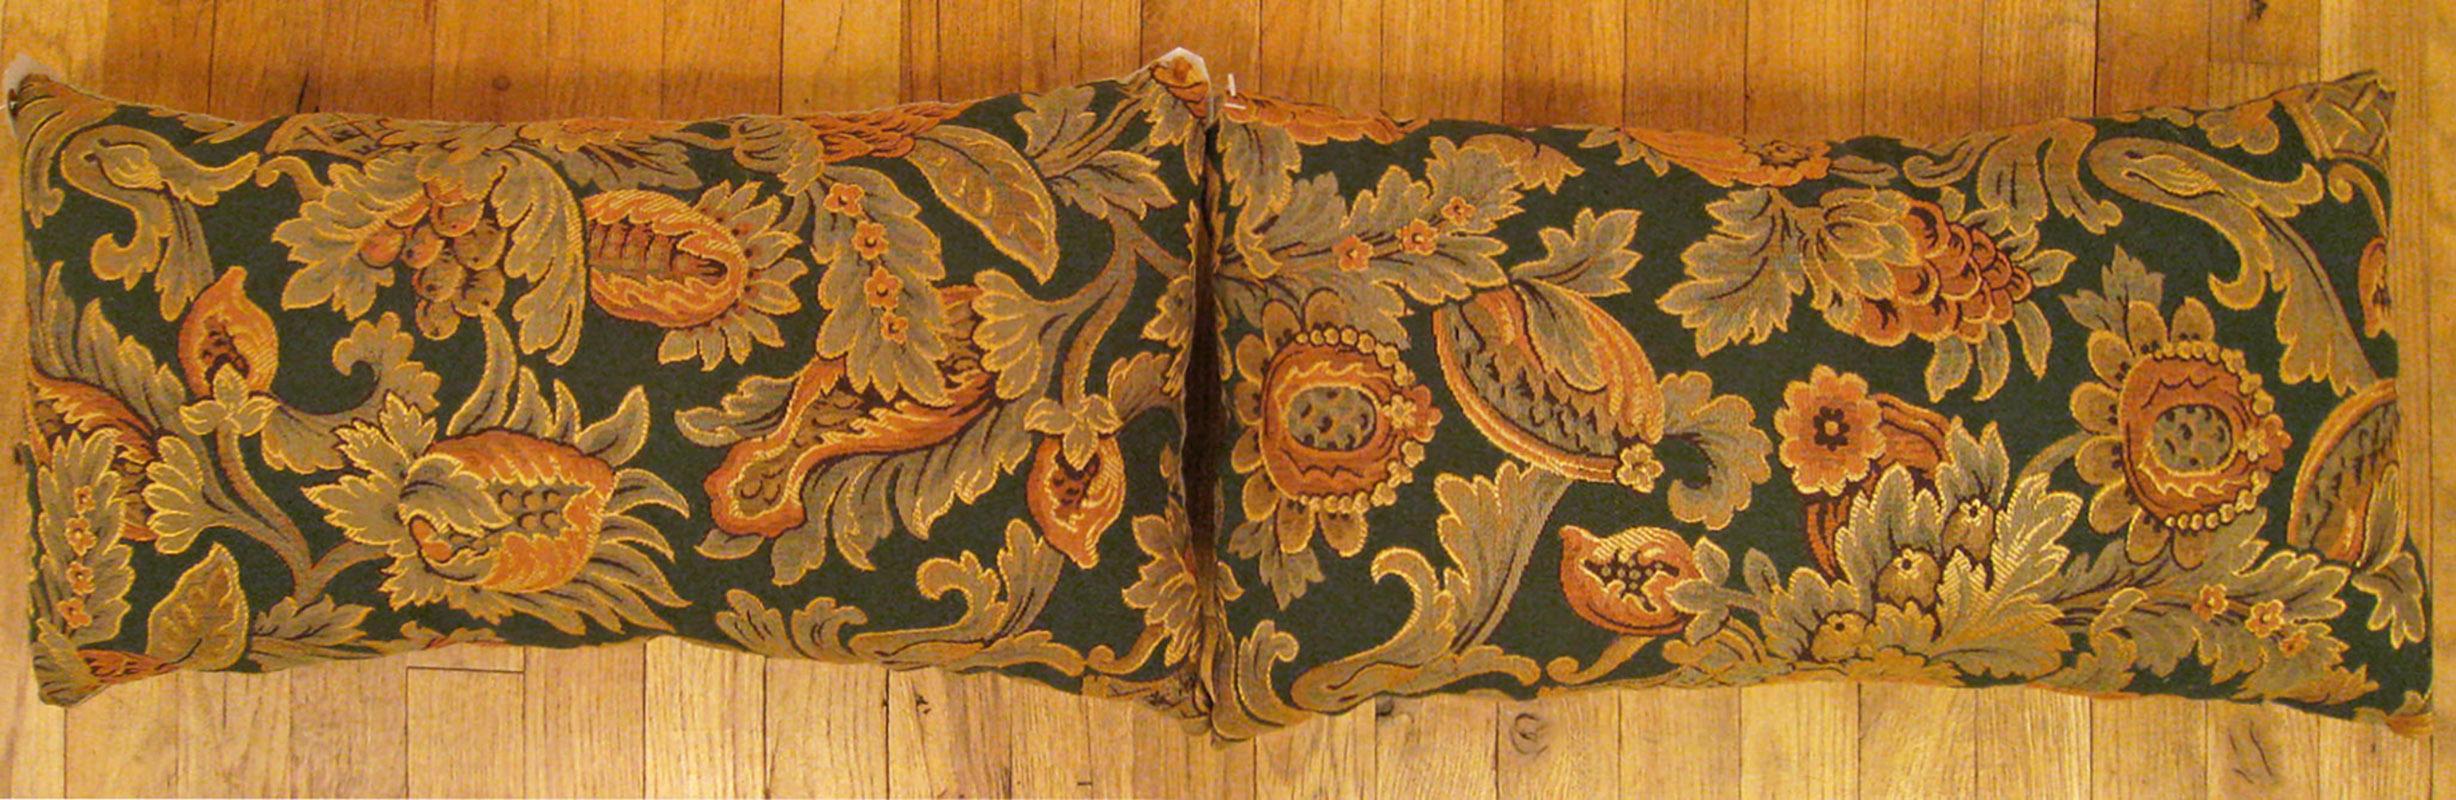 A pair of antique jacquard tapestry pillows ; size 1'0” x 1'11” each.

An antique decorative pillows with floral elements allover a gold green central field, size 1'0